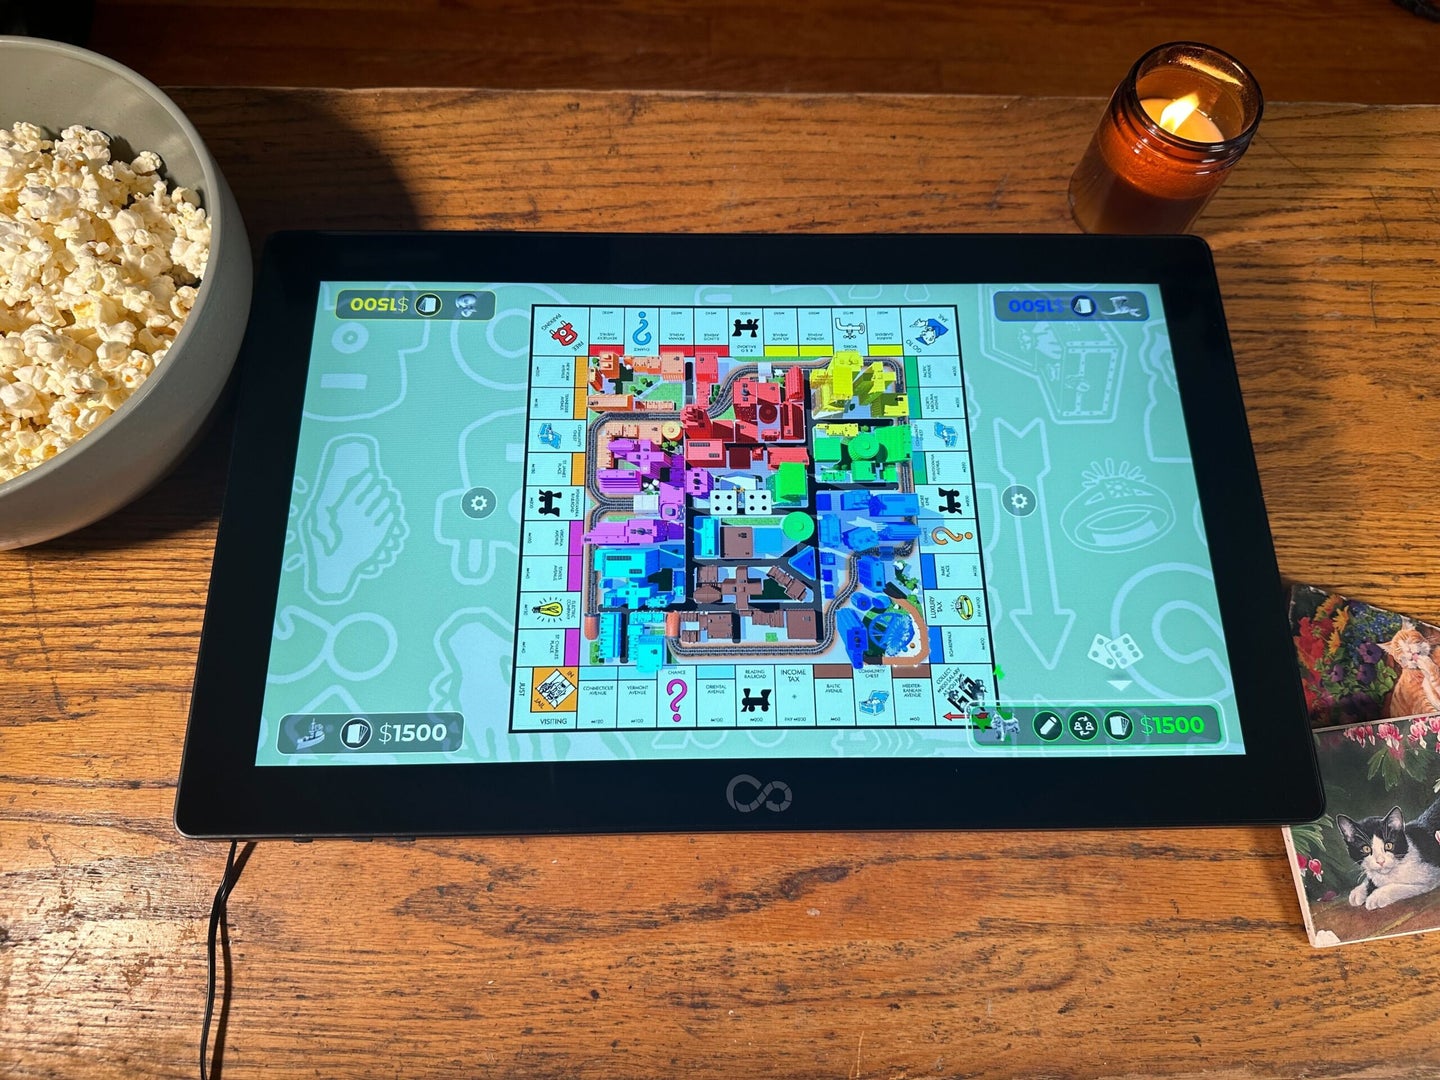 The Arcade 1up Infinity Game Board with Monopoly on the screen